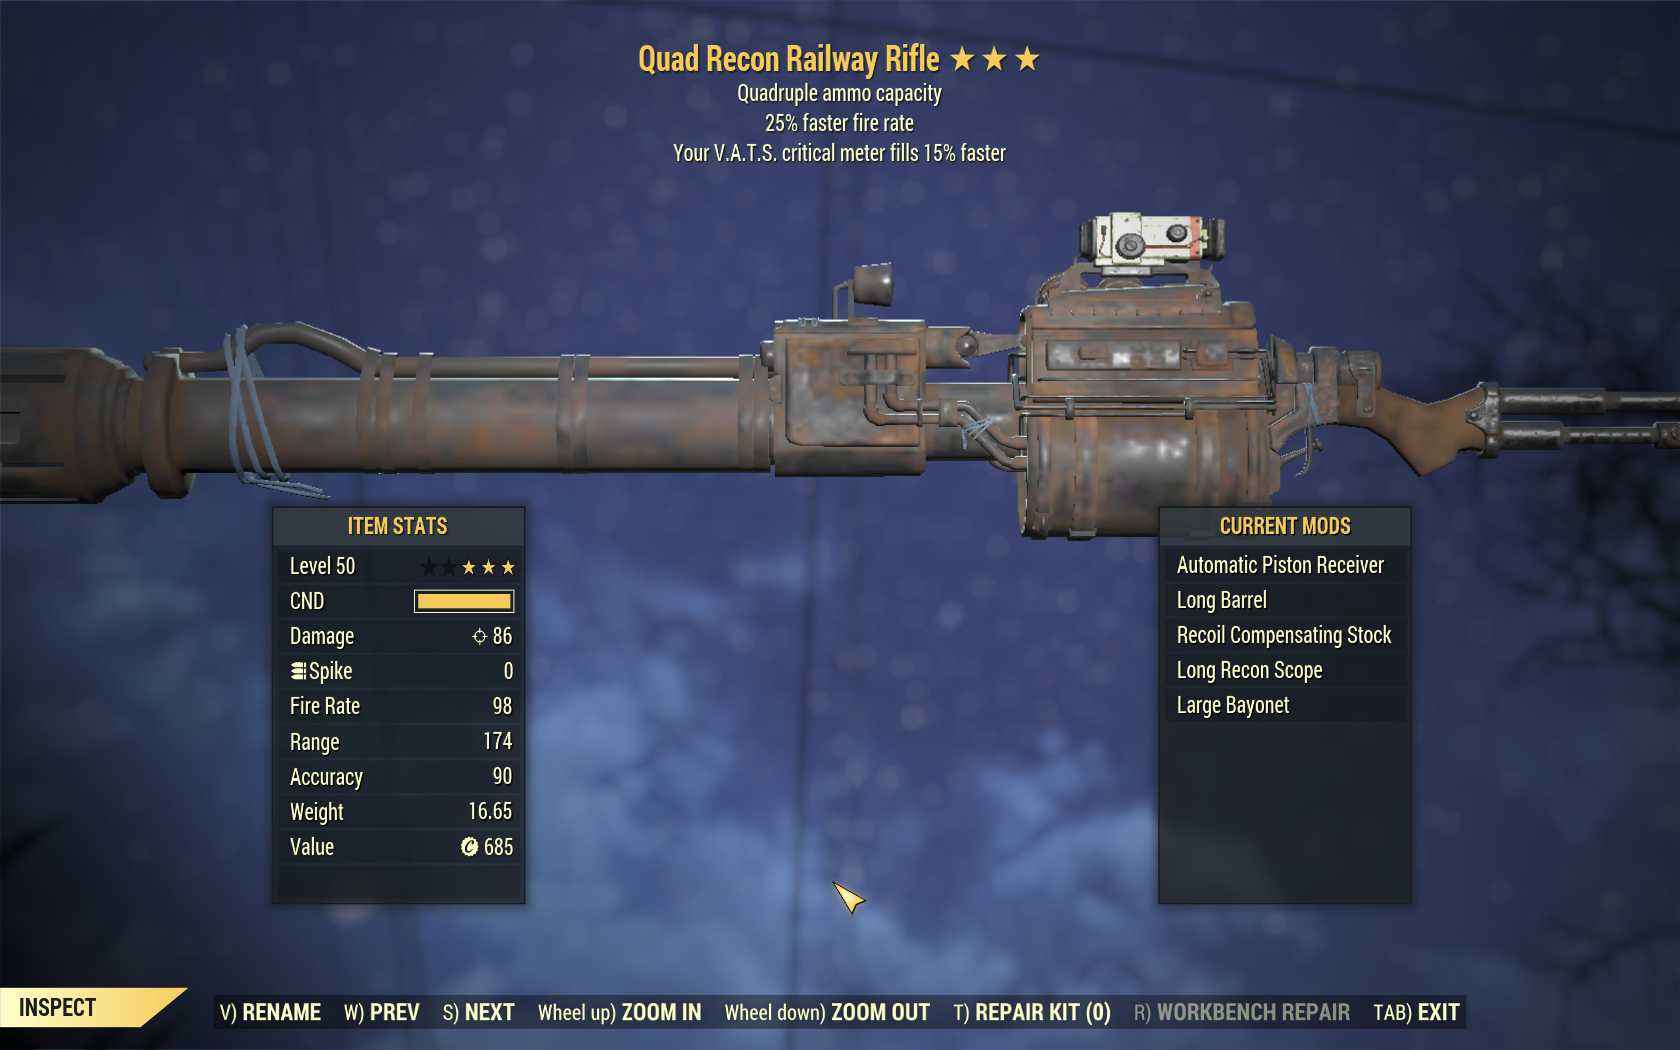 Quad Railway (25% faster fire rate, VATS crit fills 15% faster)